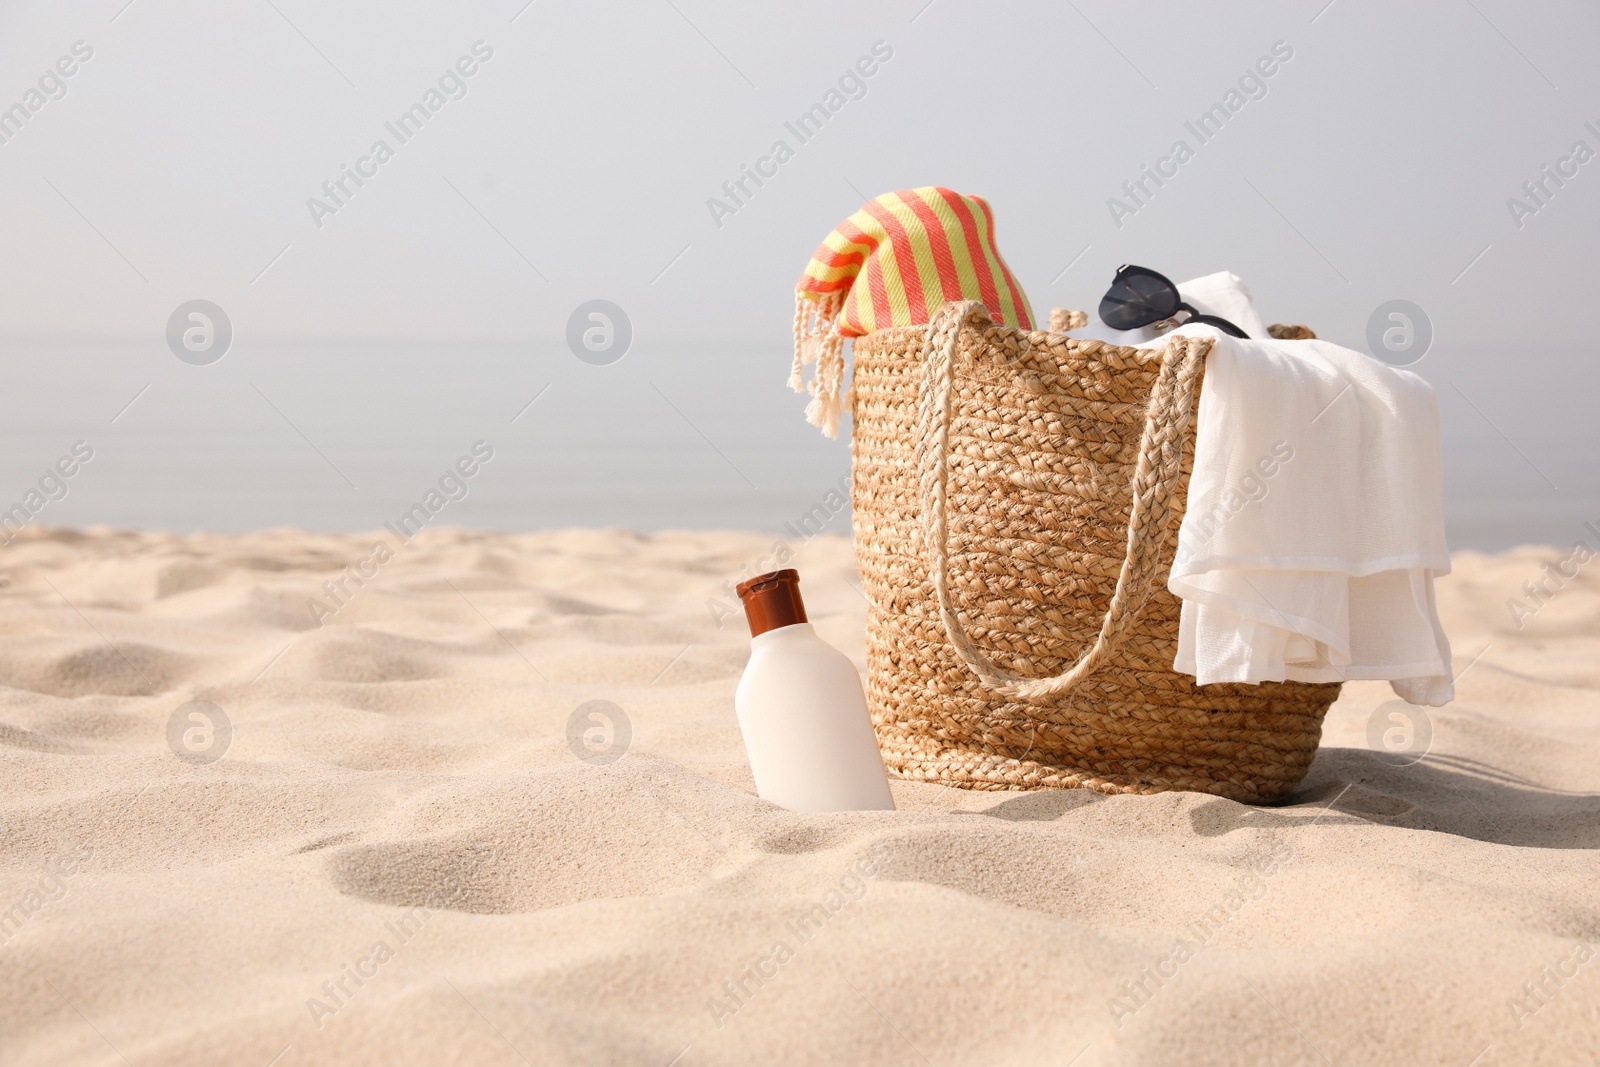 Photo of Beach bag, towel, blanket, sunglasses and sunscreen on sandy seashore, space for text